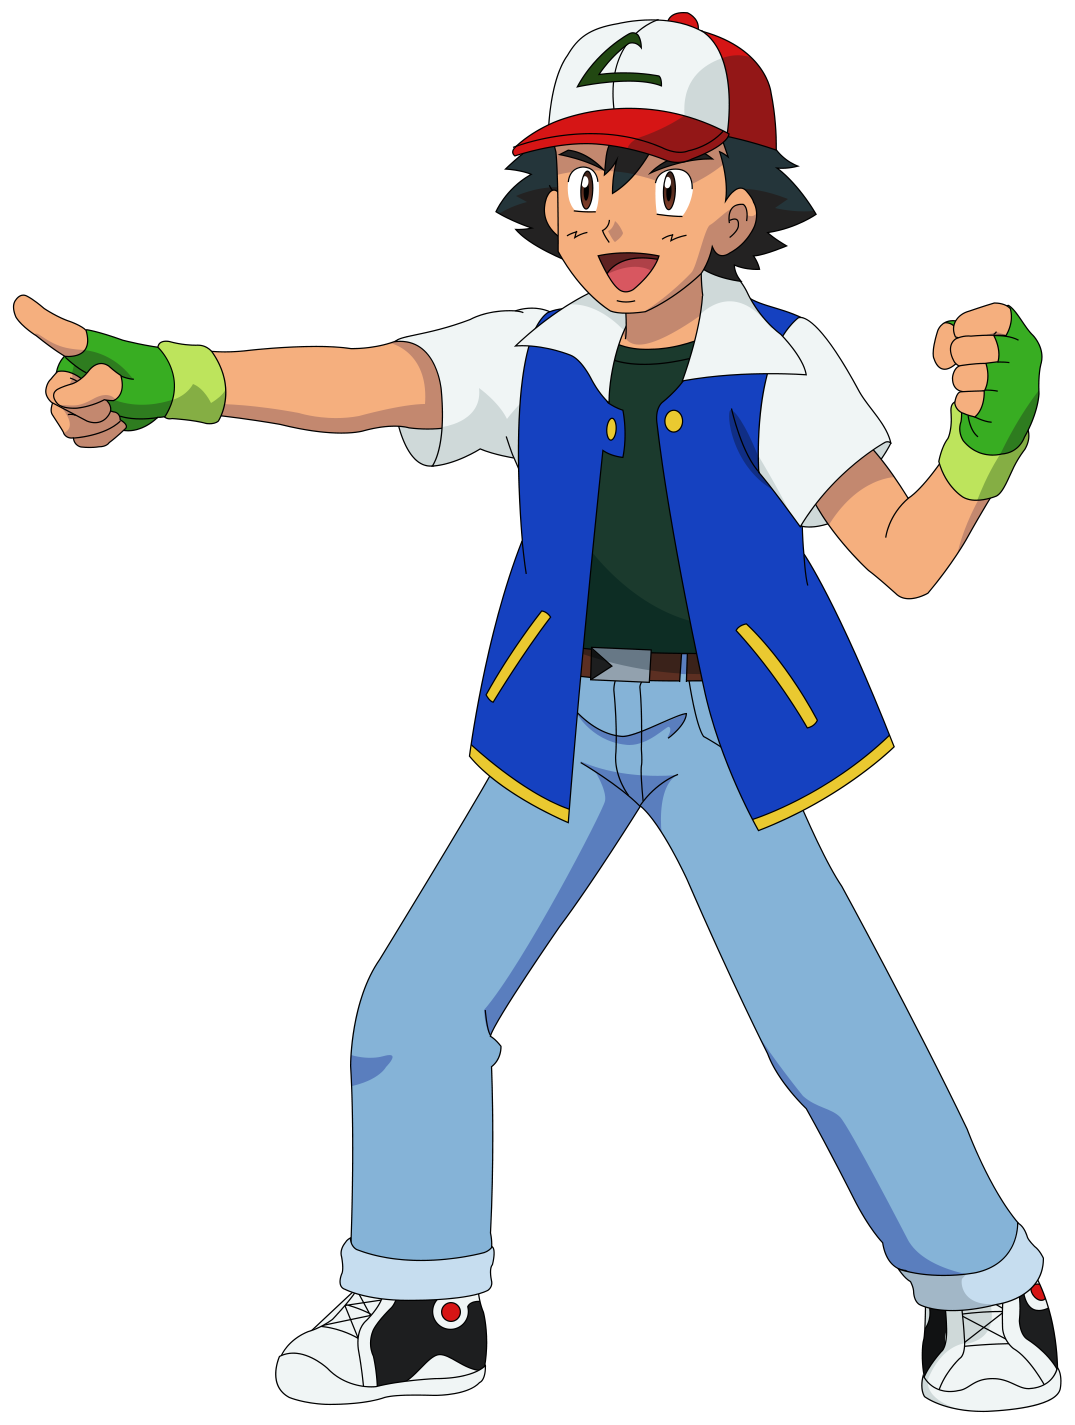 Ash Ketchum pointing to the side